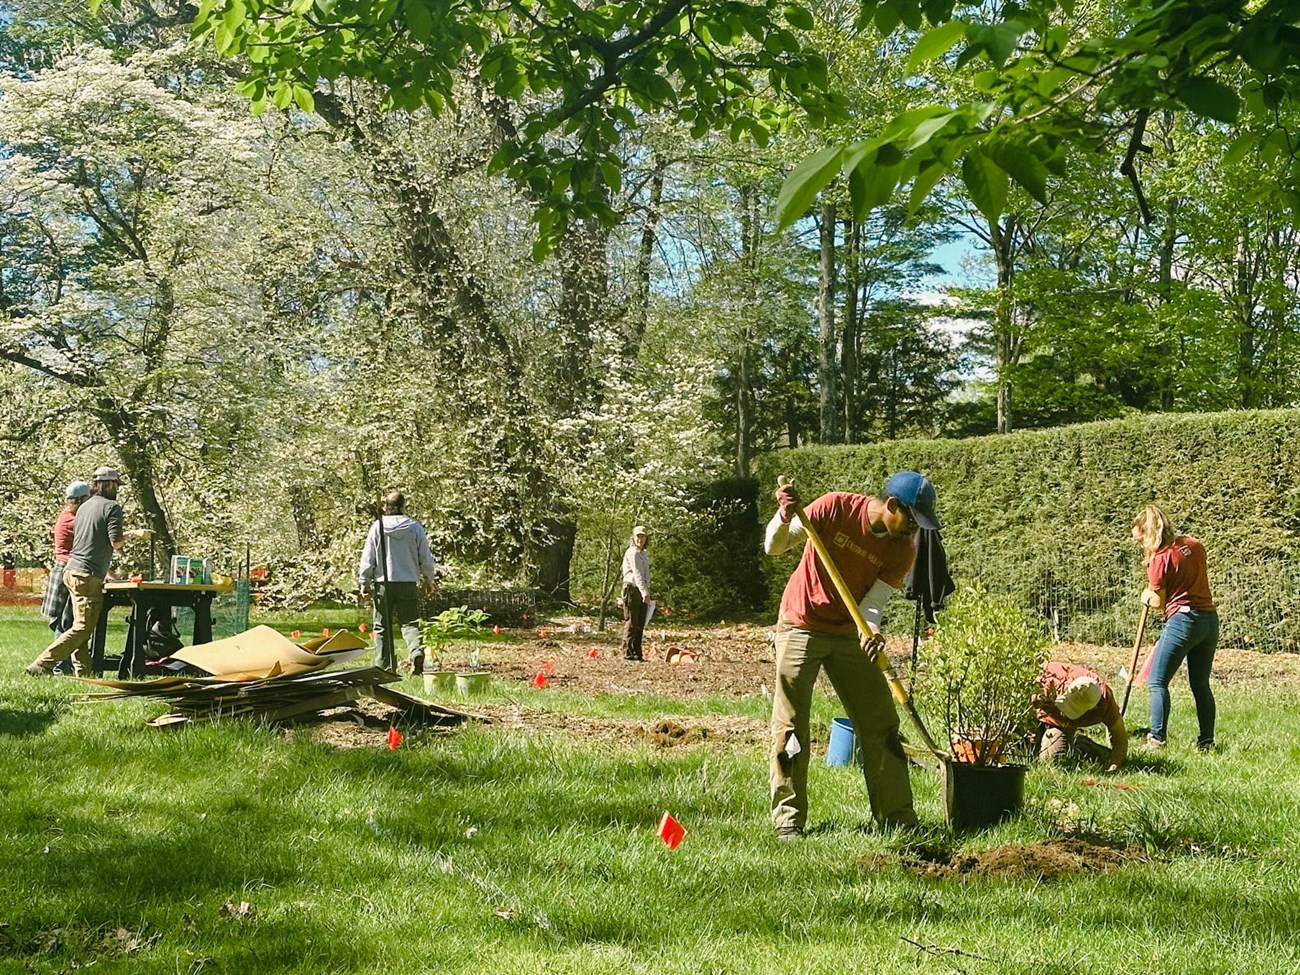 A group of people planting shrubs.